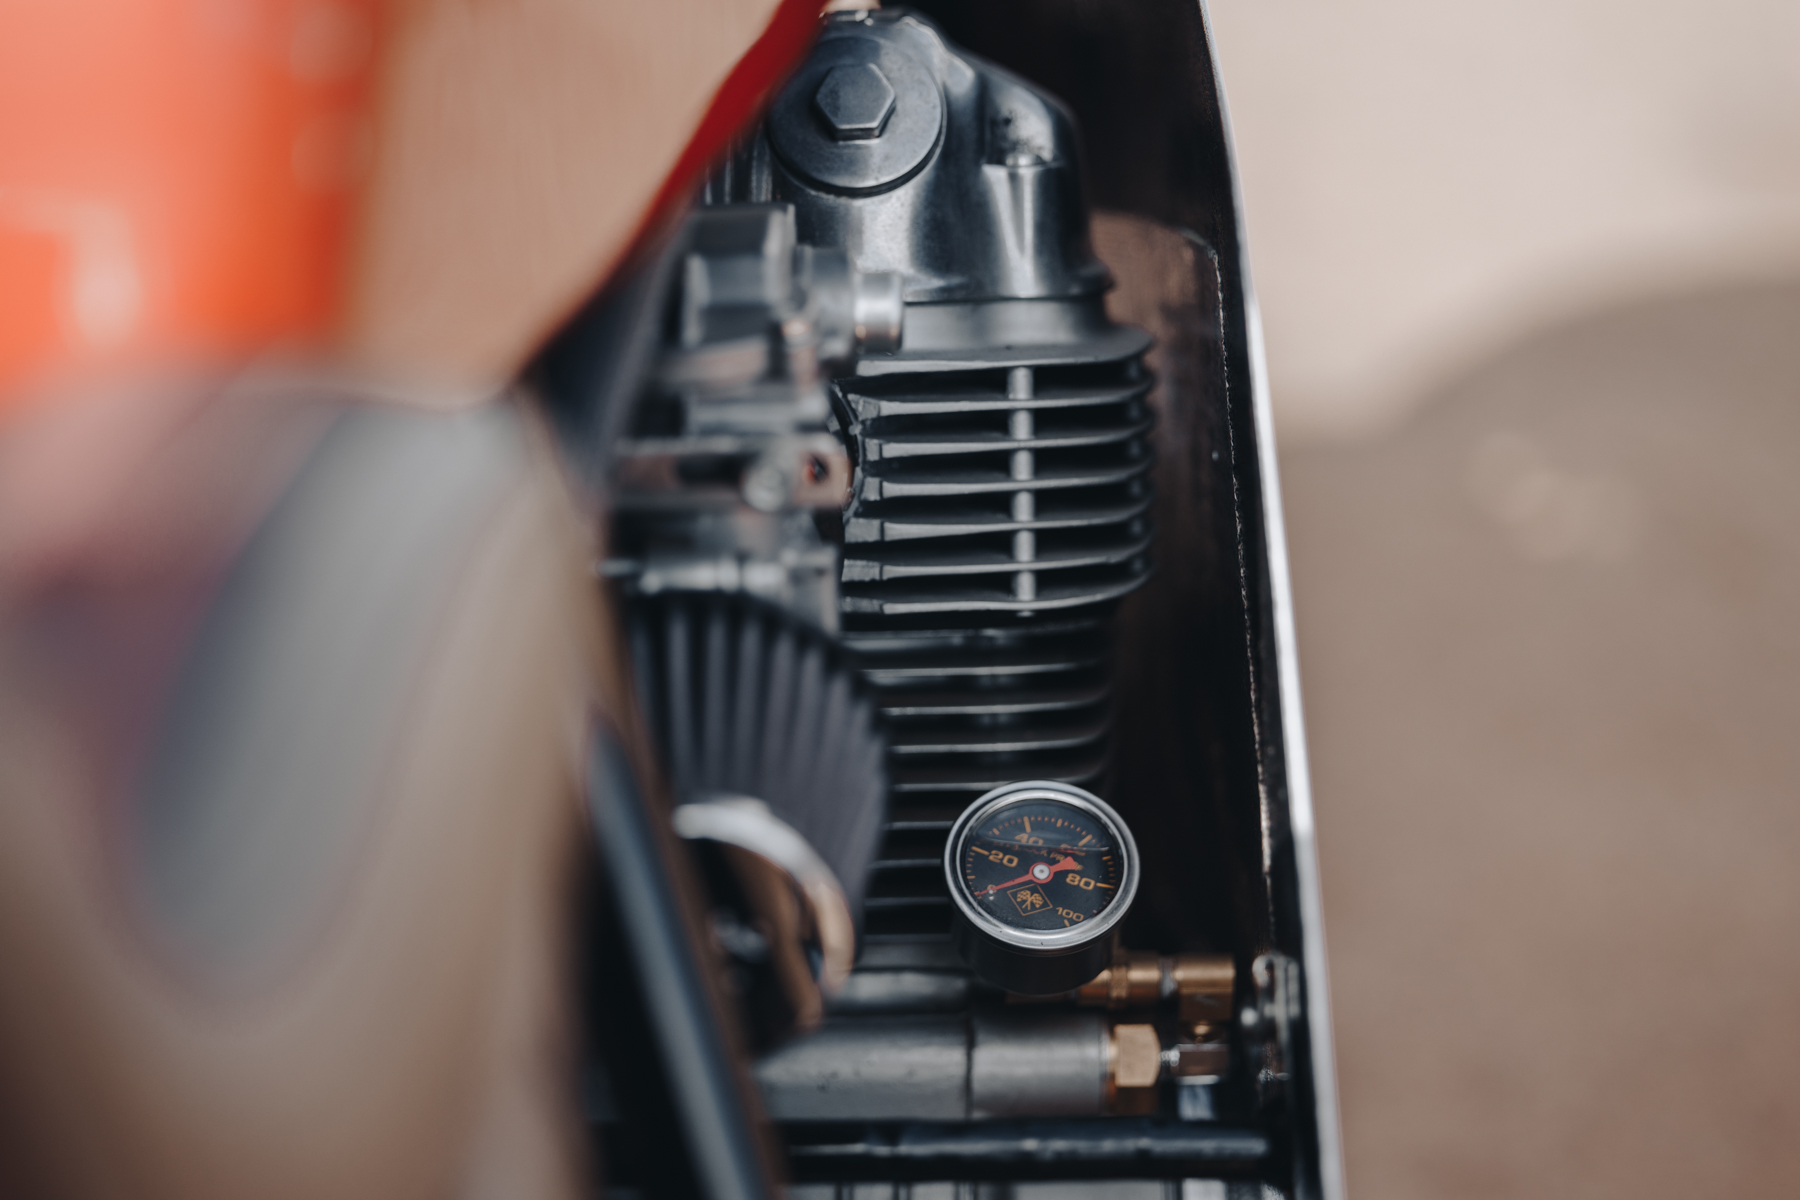 Detail photo of the right hand side of a Honda CB750 engine with oil temperature gauge